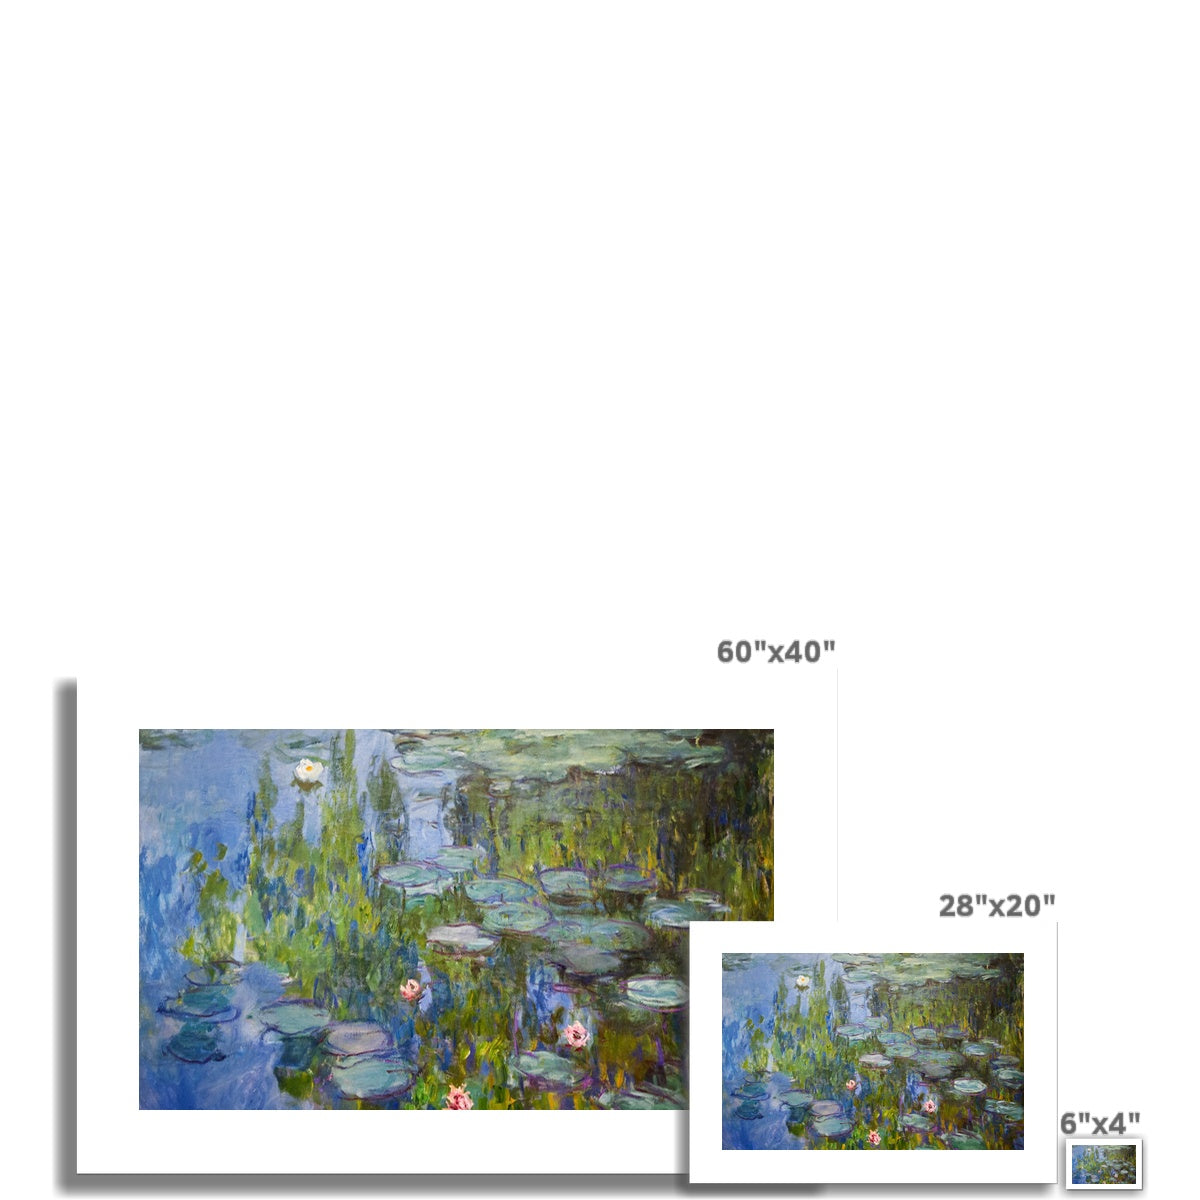 Monet - Water Lilies Poster - Atopurinto